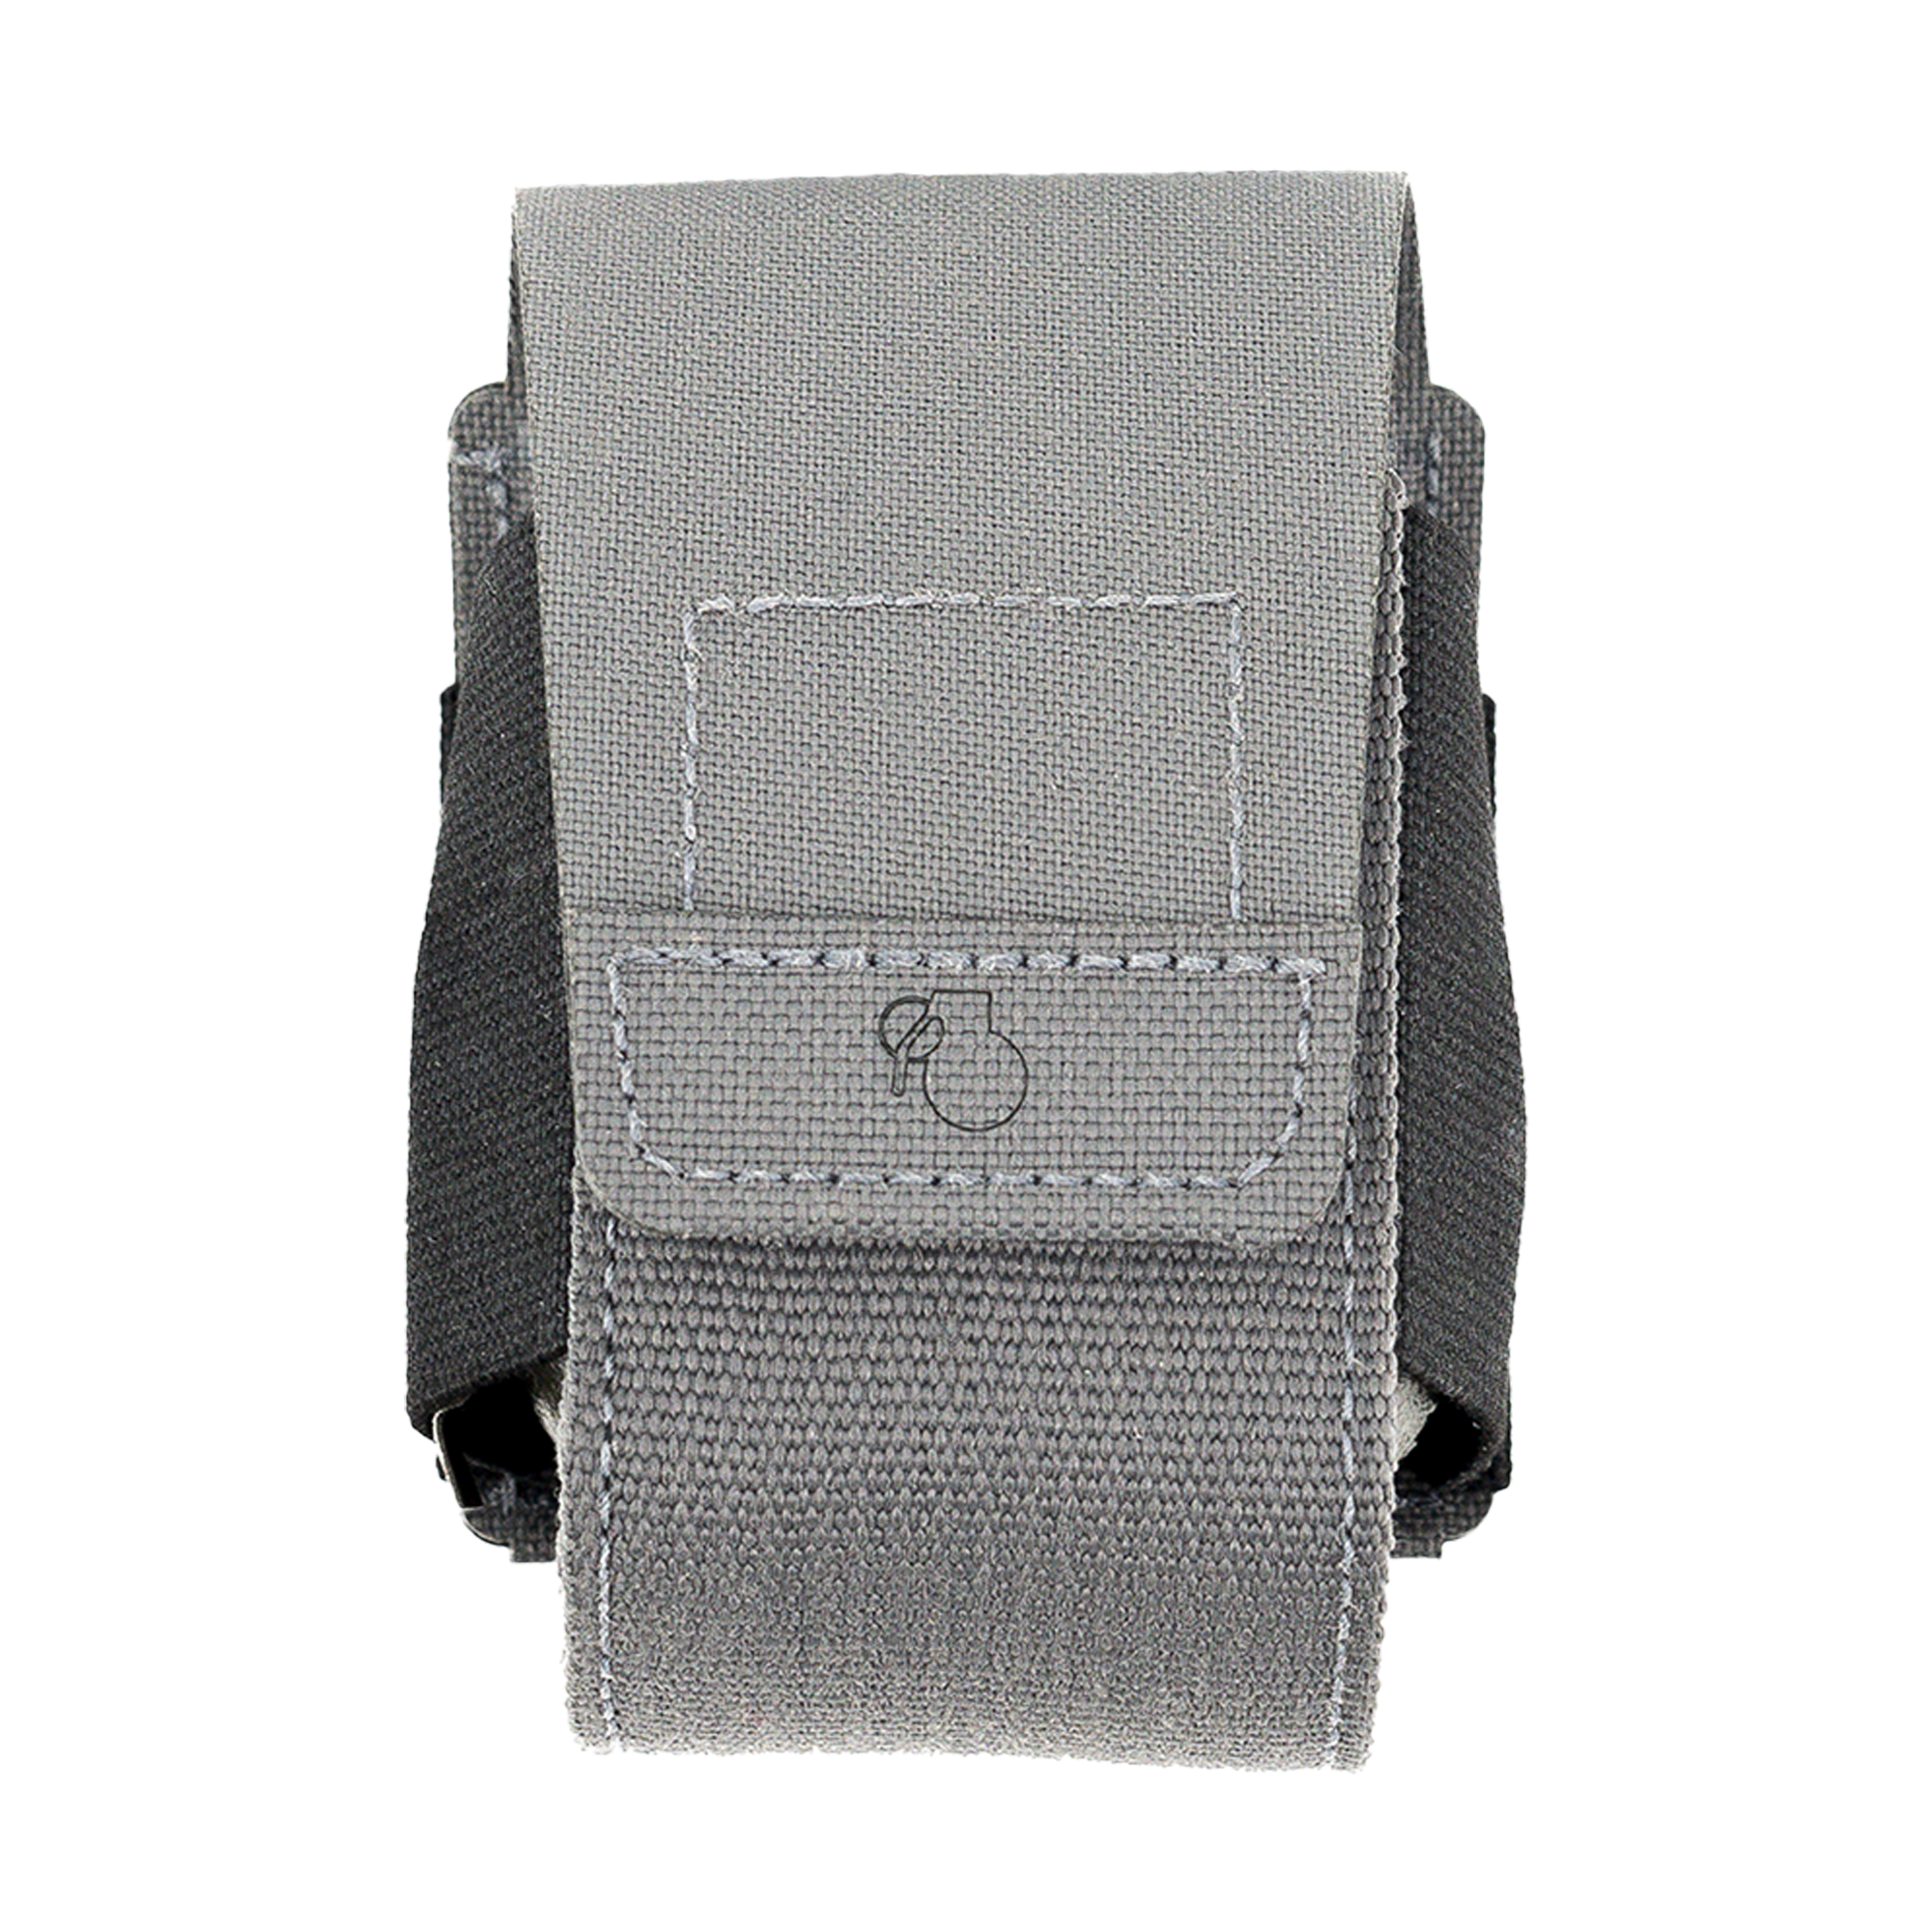 Frag Pouch Disruptive Grey, One Size